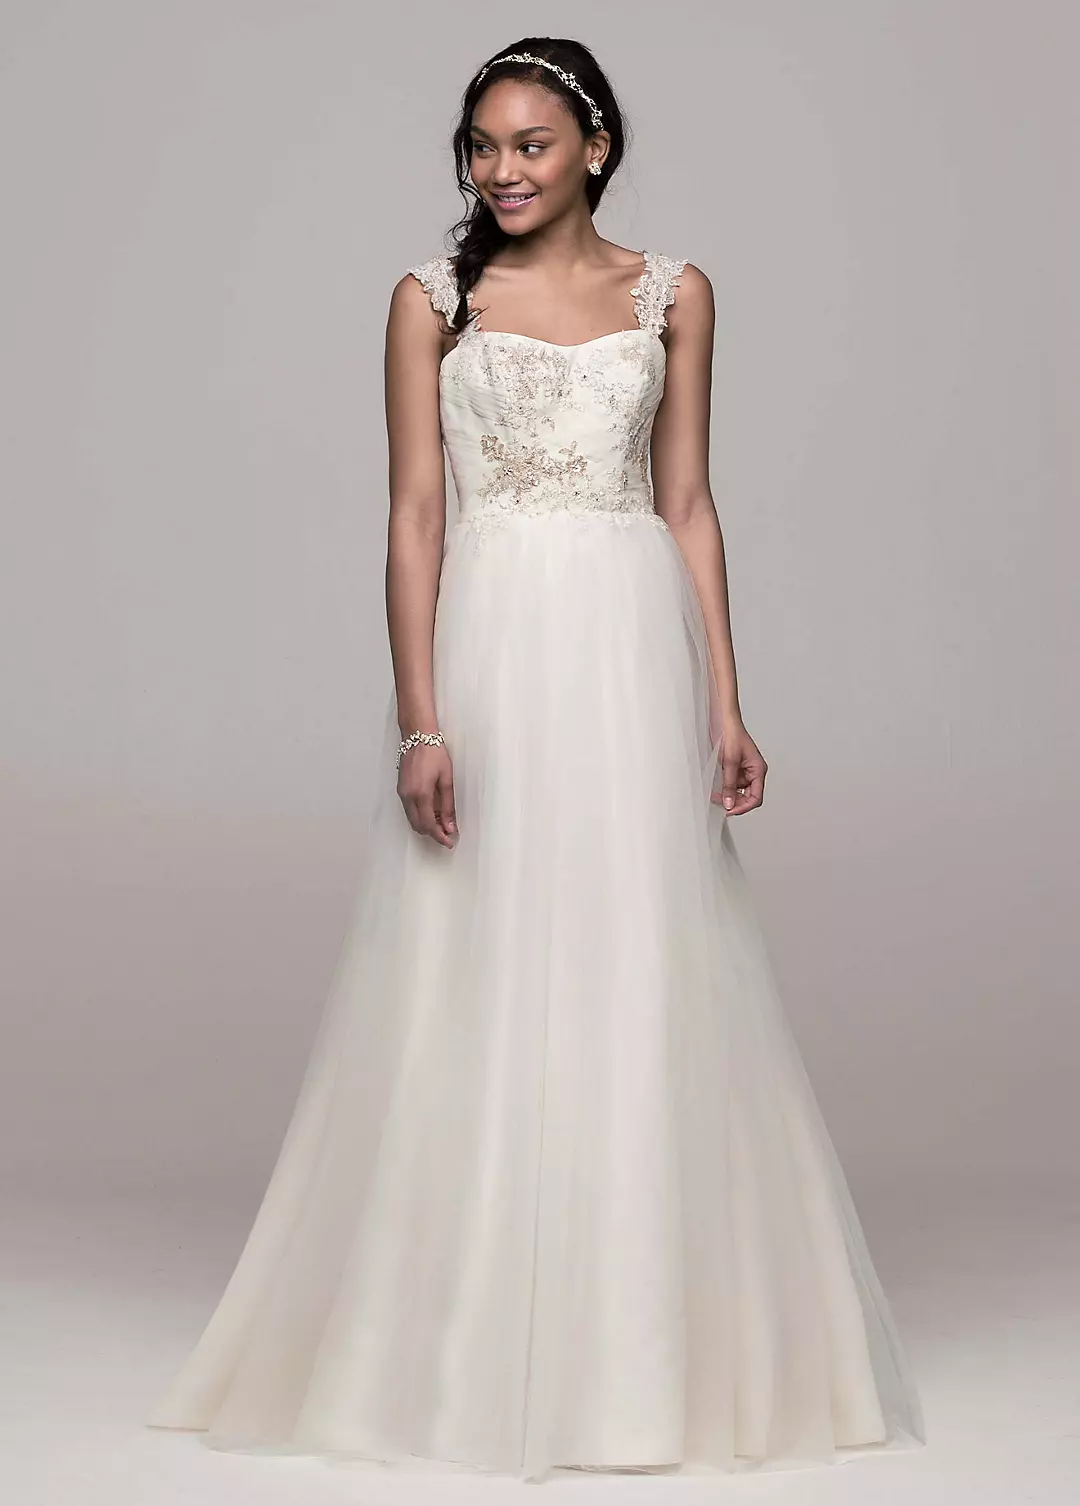 Tank Tulle A-Line Wedding Dress with Lace Details Image